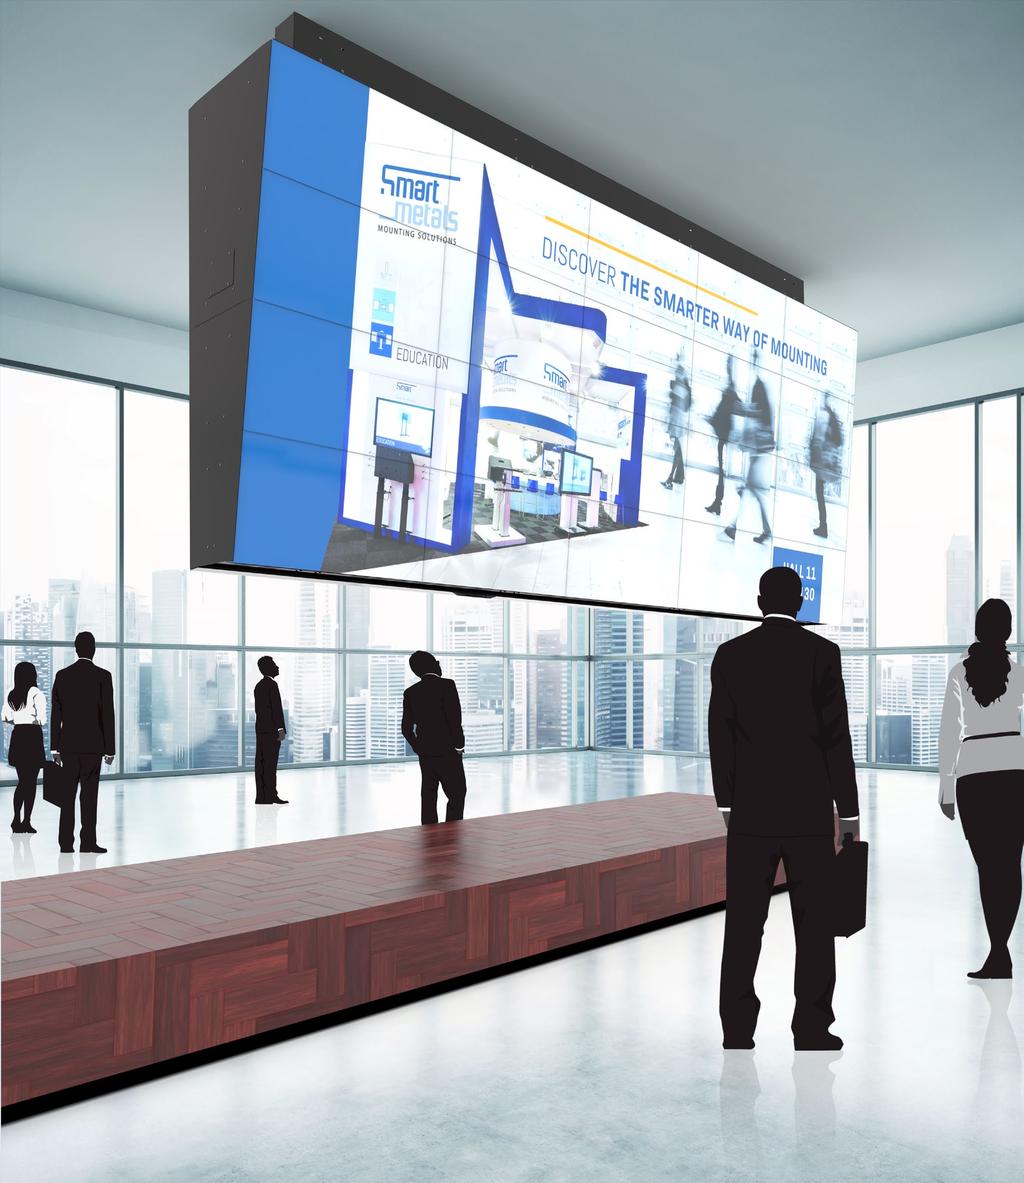 The final solution we developed is a 5x4 back-to-back VideoWall which is fully mounted to the ceiling.